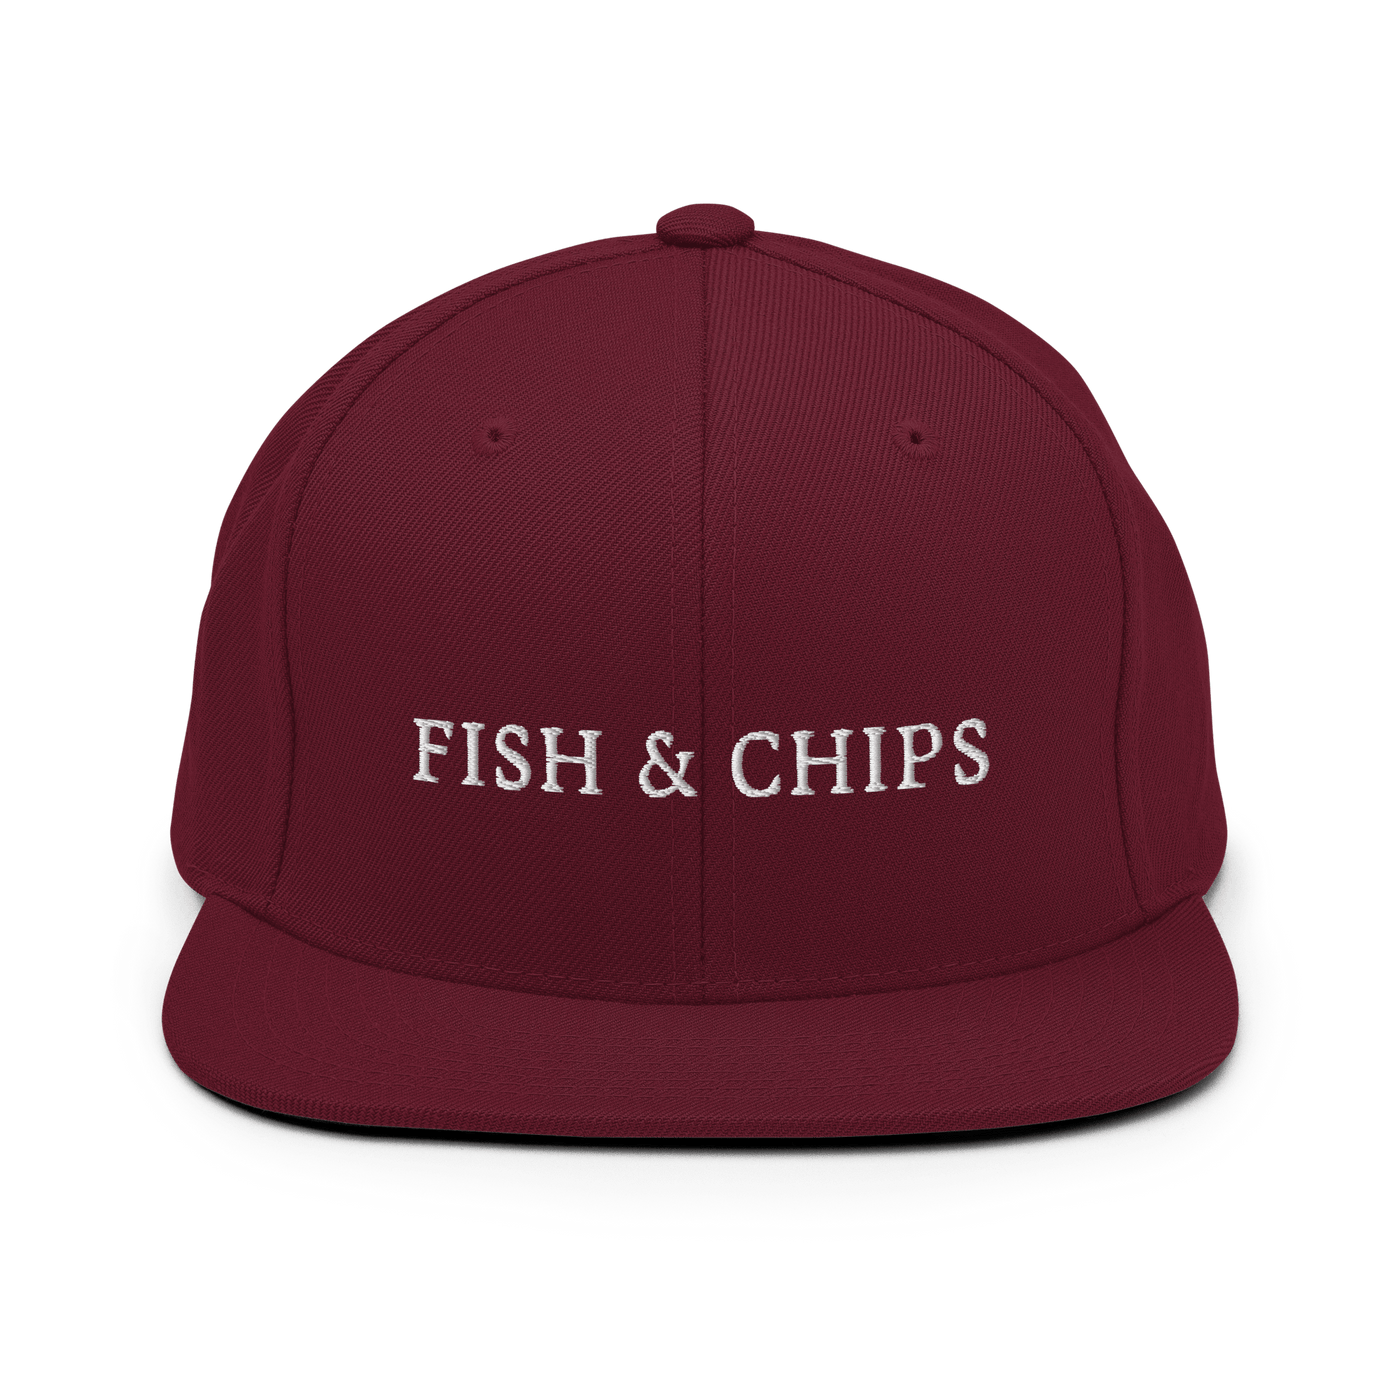 Fish & Chips Snapback Hat - Maroon - - Just Another Cap Store